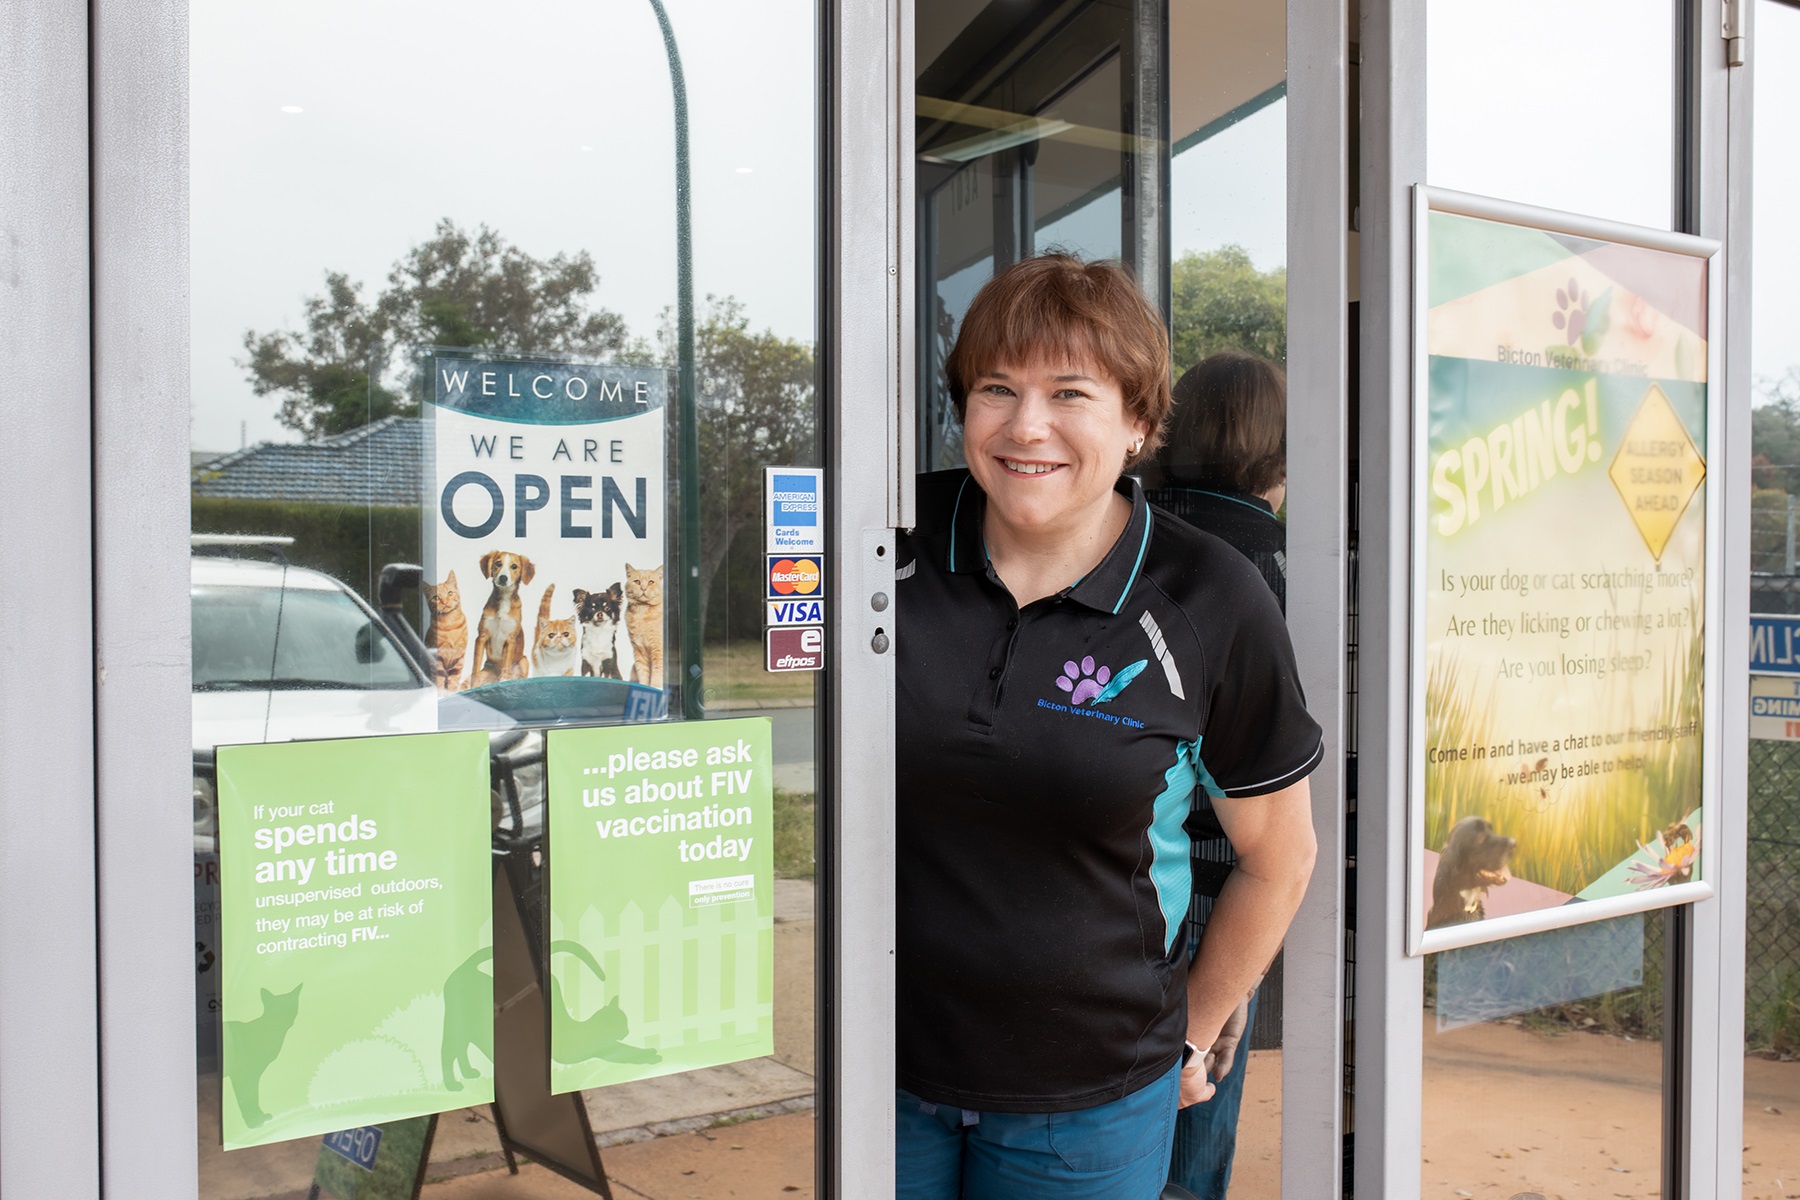 Photo of a female small business owner standing in the doorway to her business.